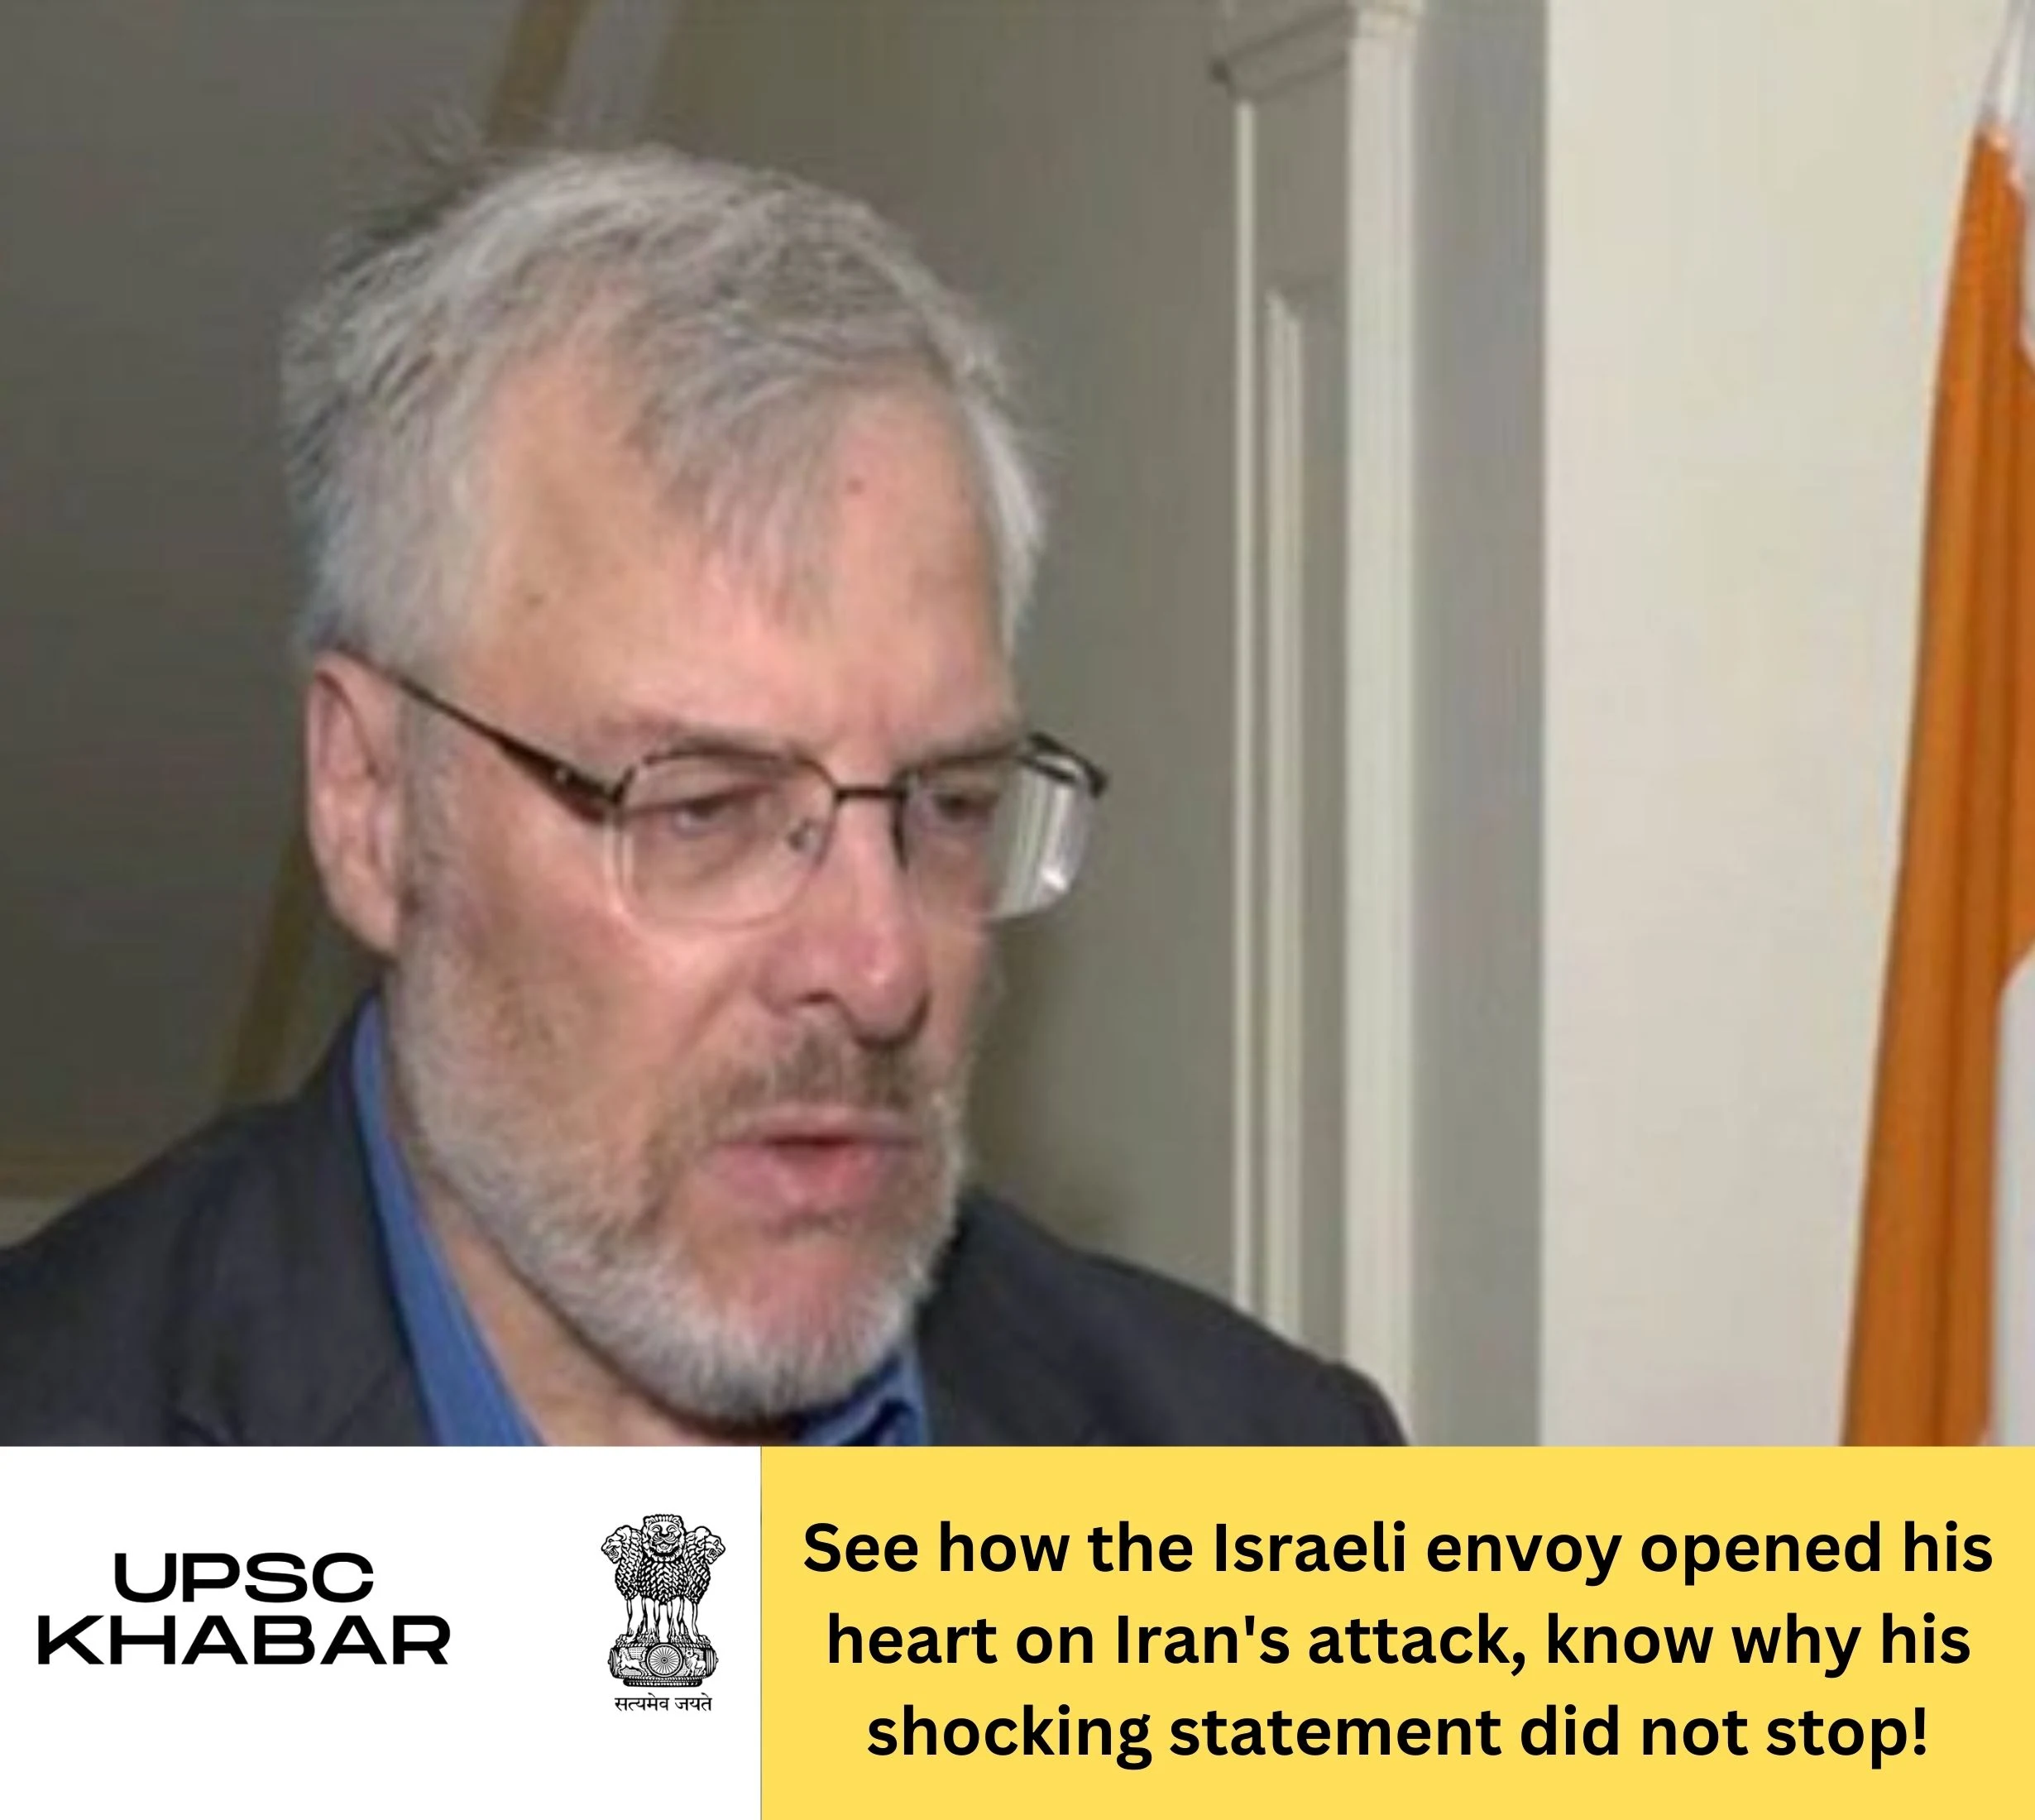 See how the Israeli envoy opened his heart on Iran's attack, know why his shocking statement did not stop!